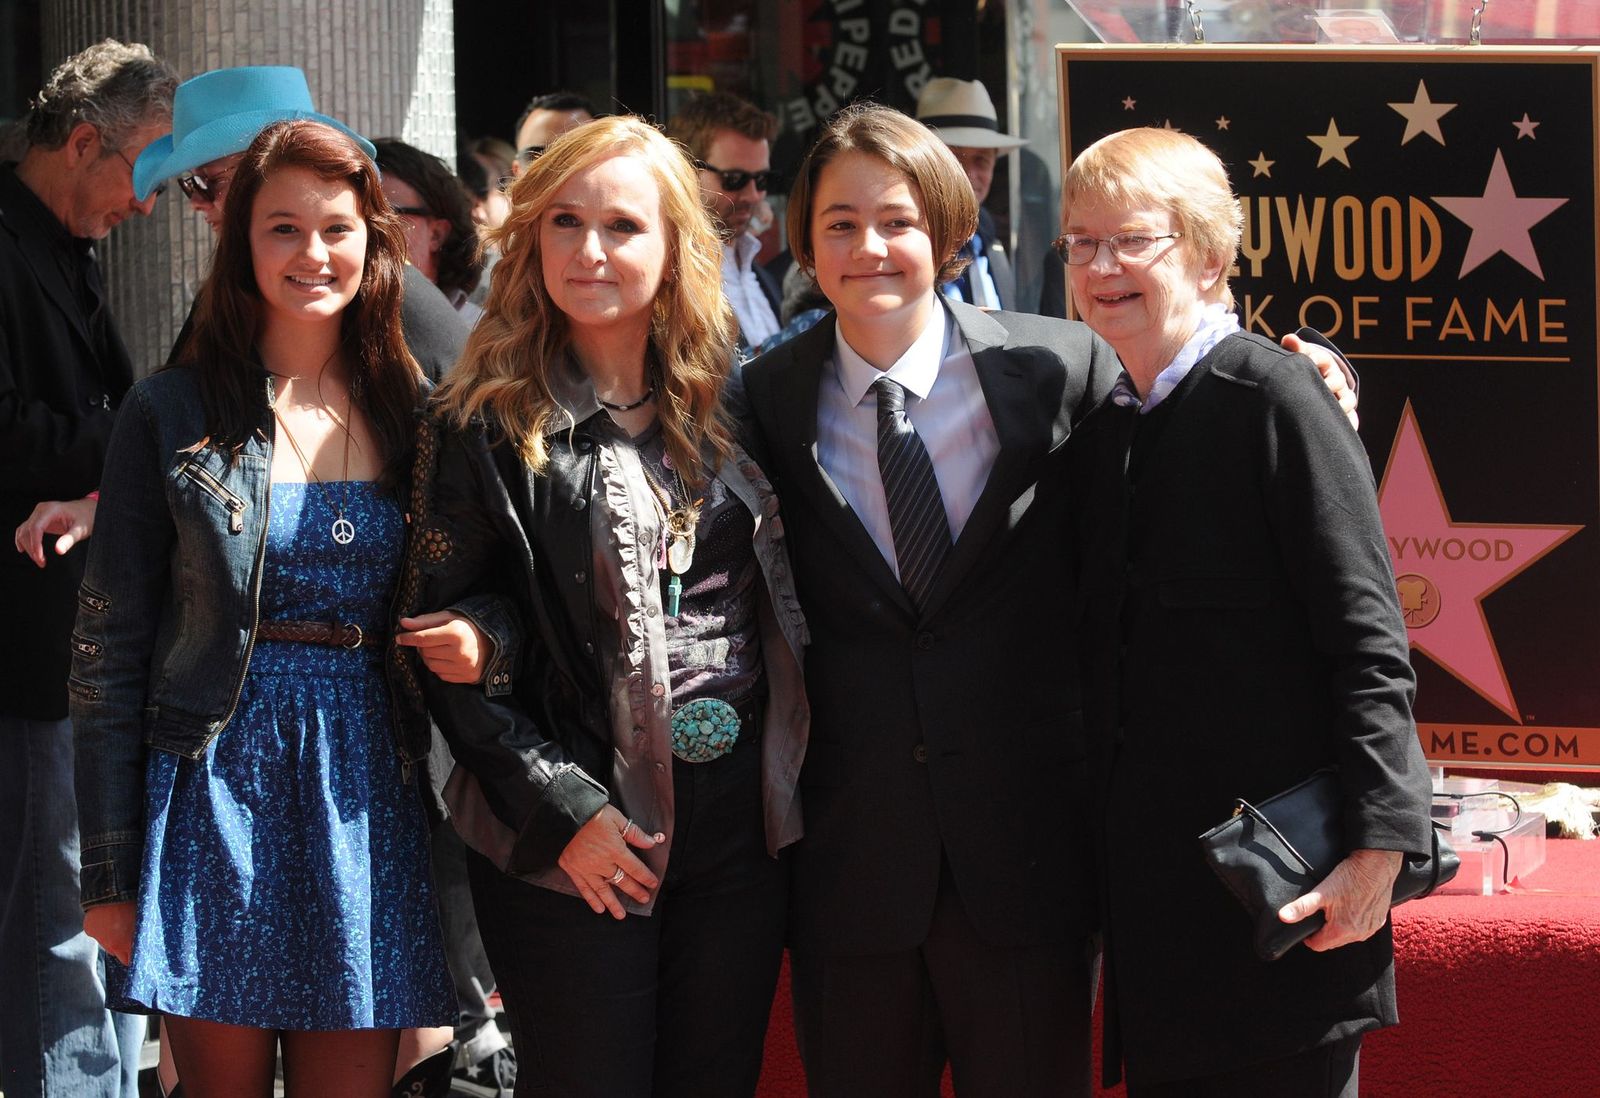 Bailey Cypher, Melissa Etheridge, Beckett Cypher, and Elizabeth Williamson at Etheridge's Hollywood Walk of Fame Induction Ceremony on September 27, 2011, in Hollywood, California | Photo: Duffy-Marie Arnoult/WireImage/Getty Images